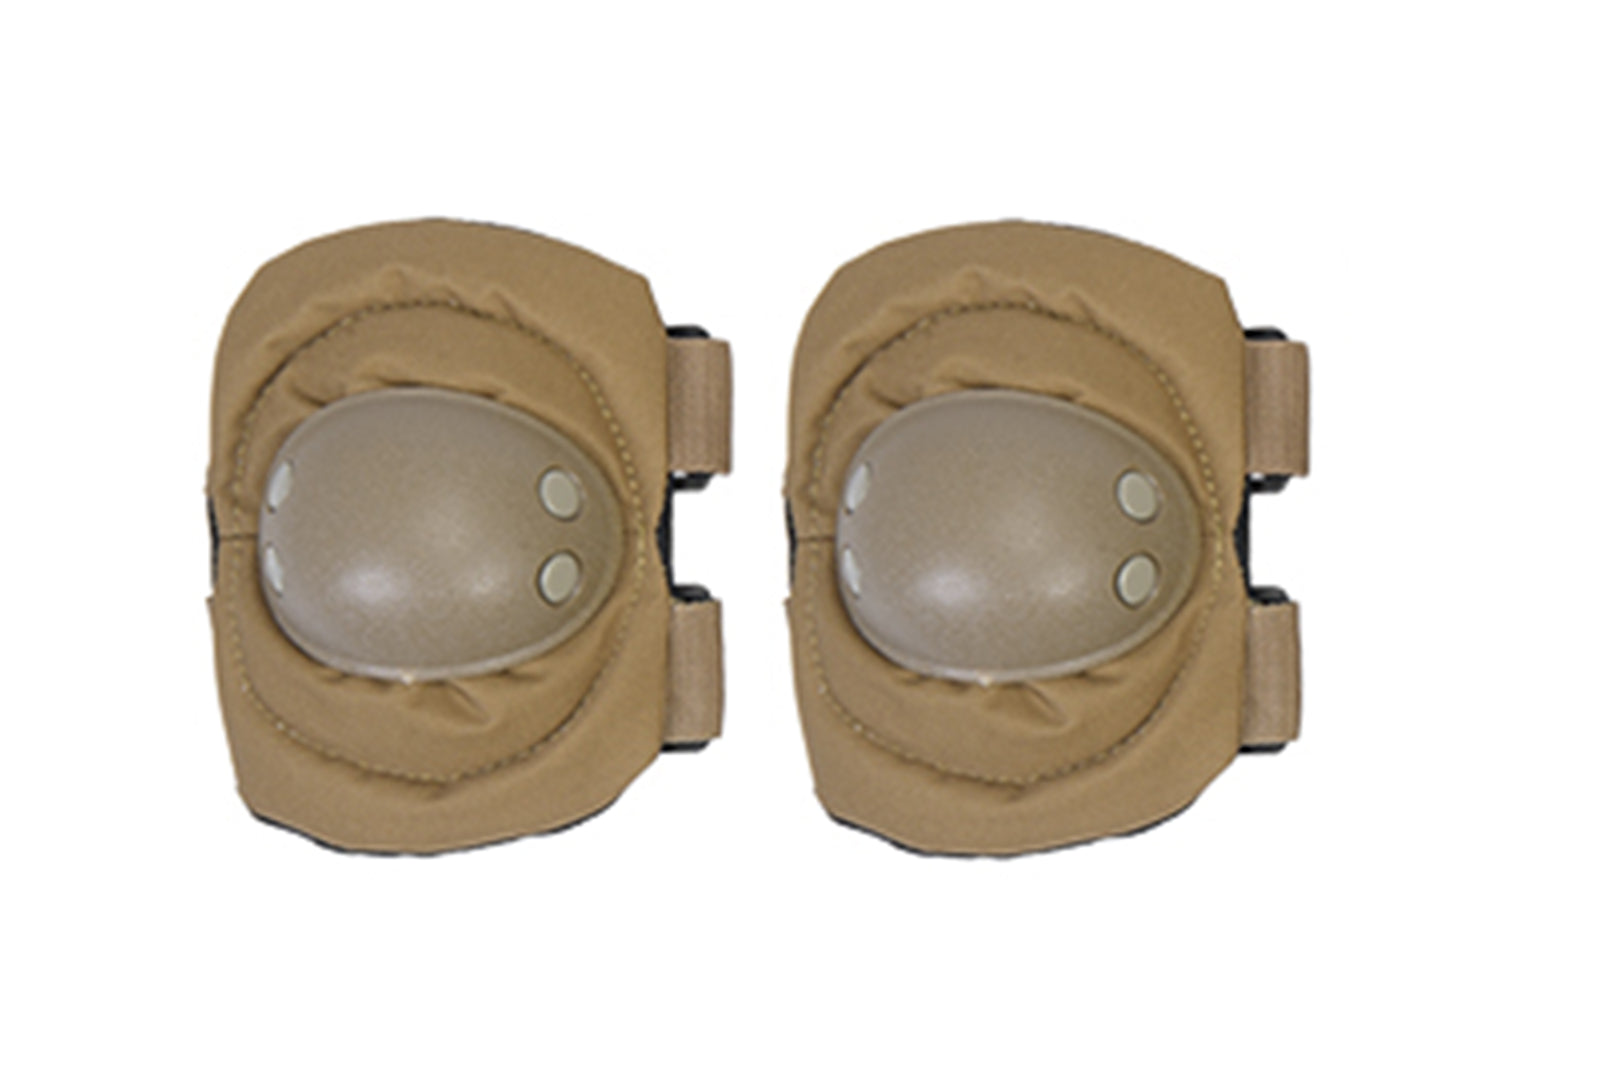 UK ARMS AIRSOFT TACTICAL ELBOW PAD